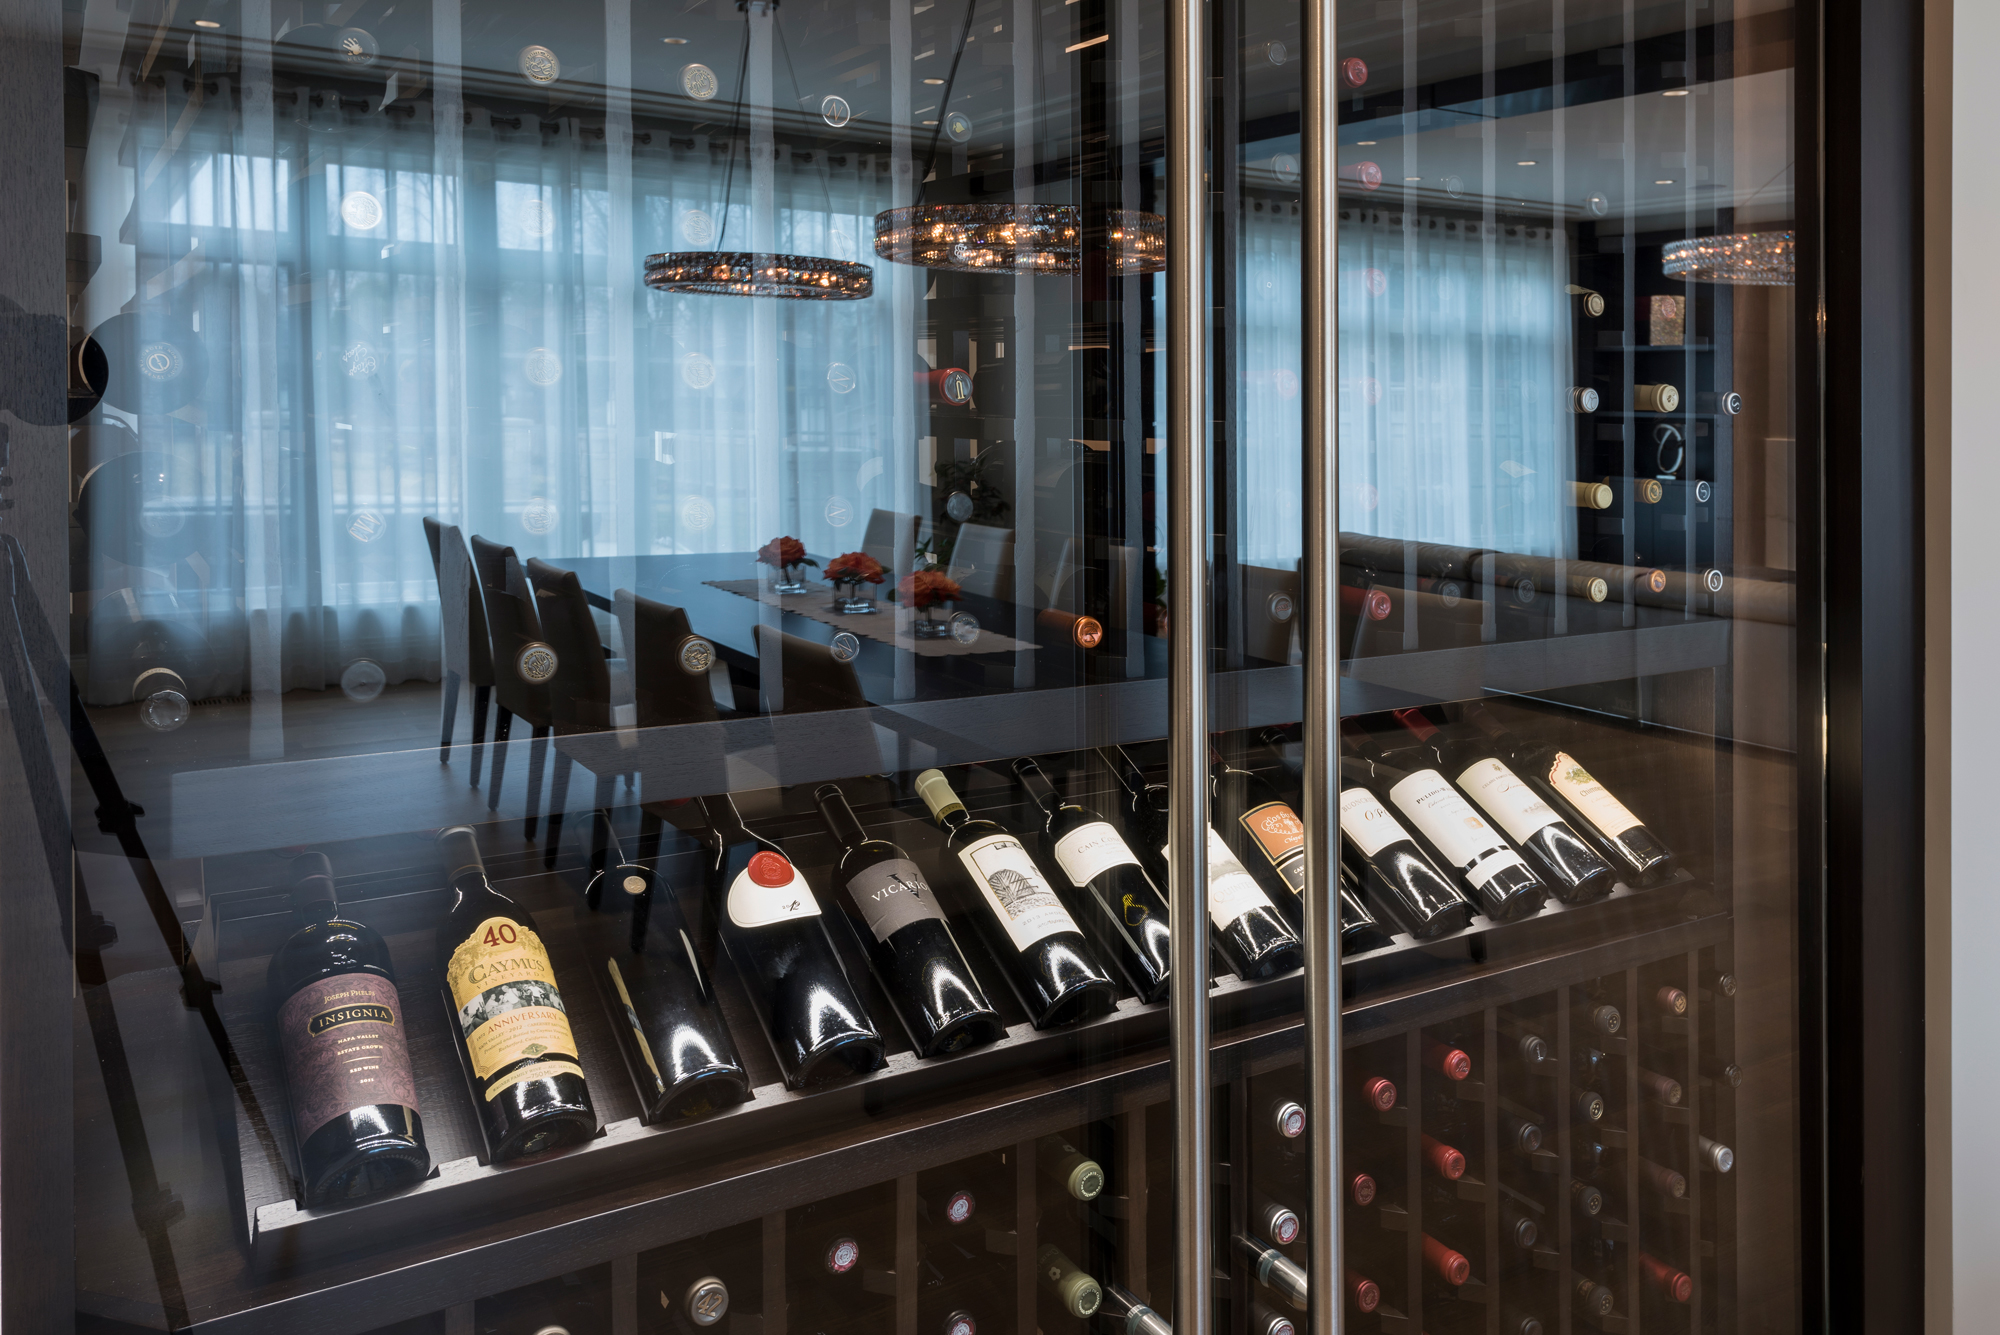 Wine Cabinet Displays Wine Collection as Art